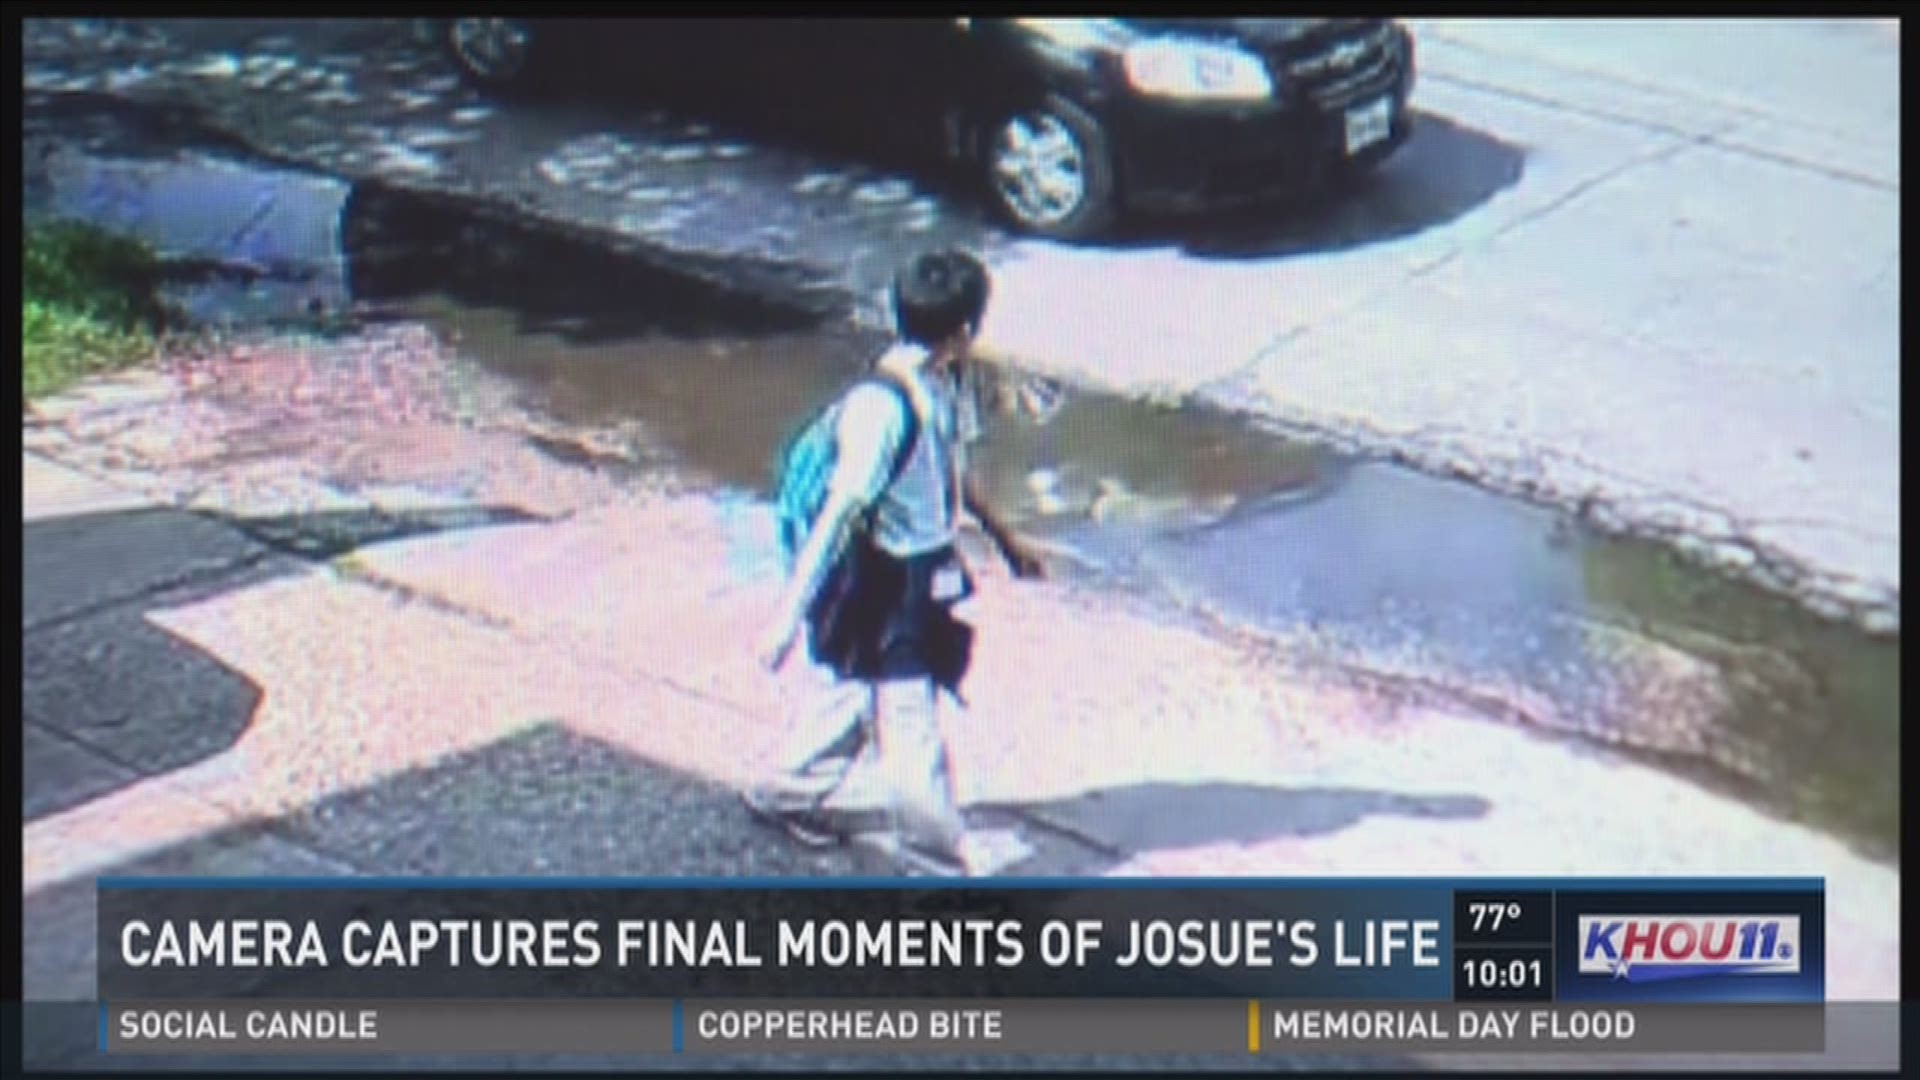 Home surveillance video shows Josue Flores walking home from school moments before he was stabbed to death. Police are still searching for the suspect.